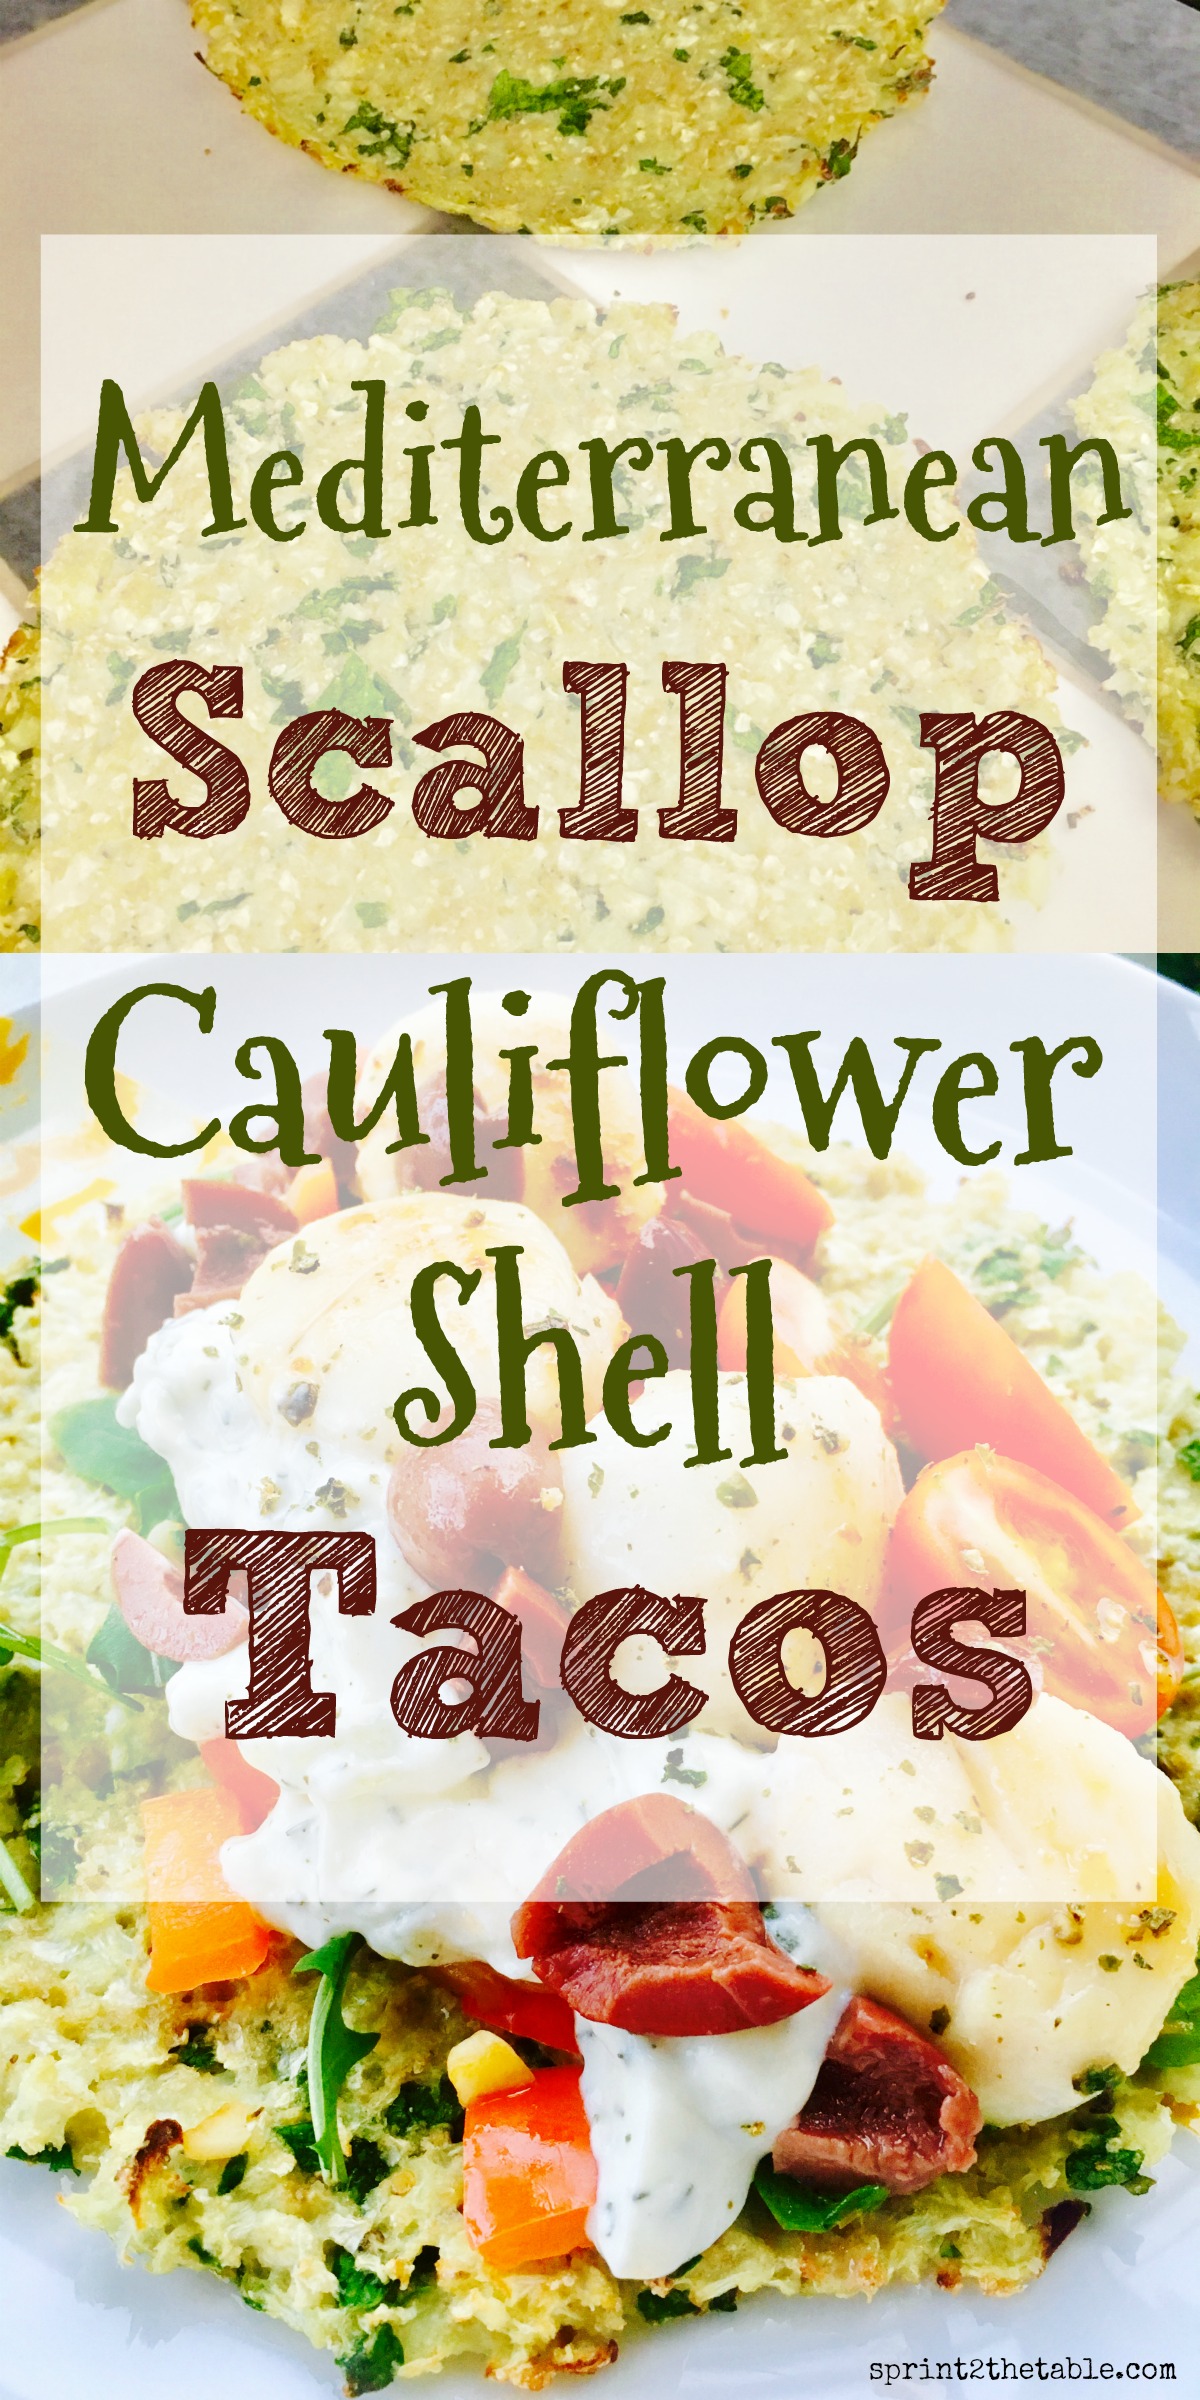 This quick cauliflower crust is the perfect shell to fill with whatever you're craving.  I'm partial to these Mediterranean Scallop Cauliflower Shell Tacos.